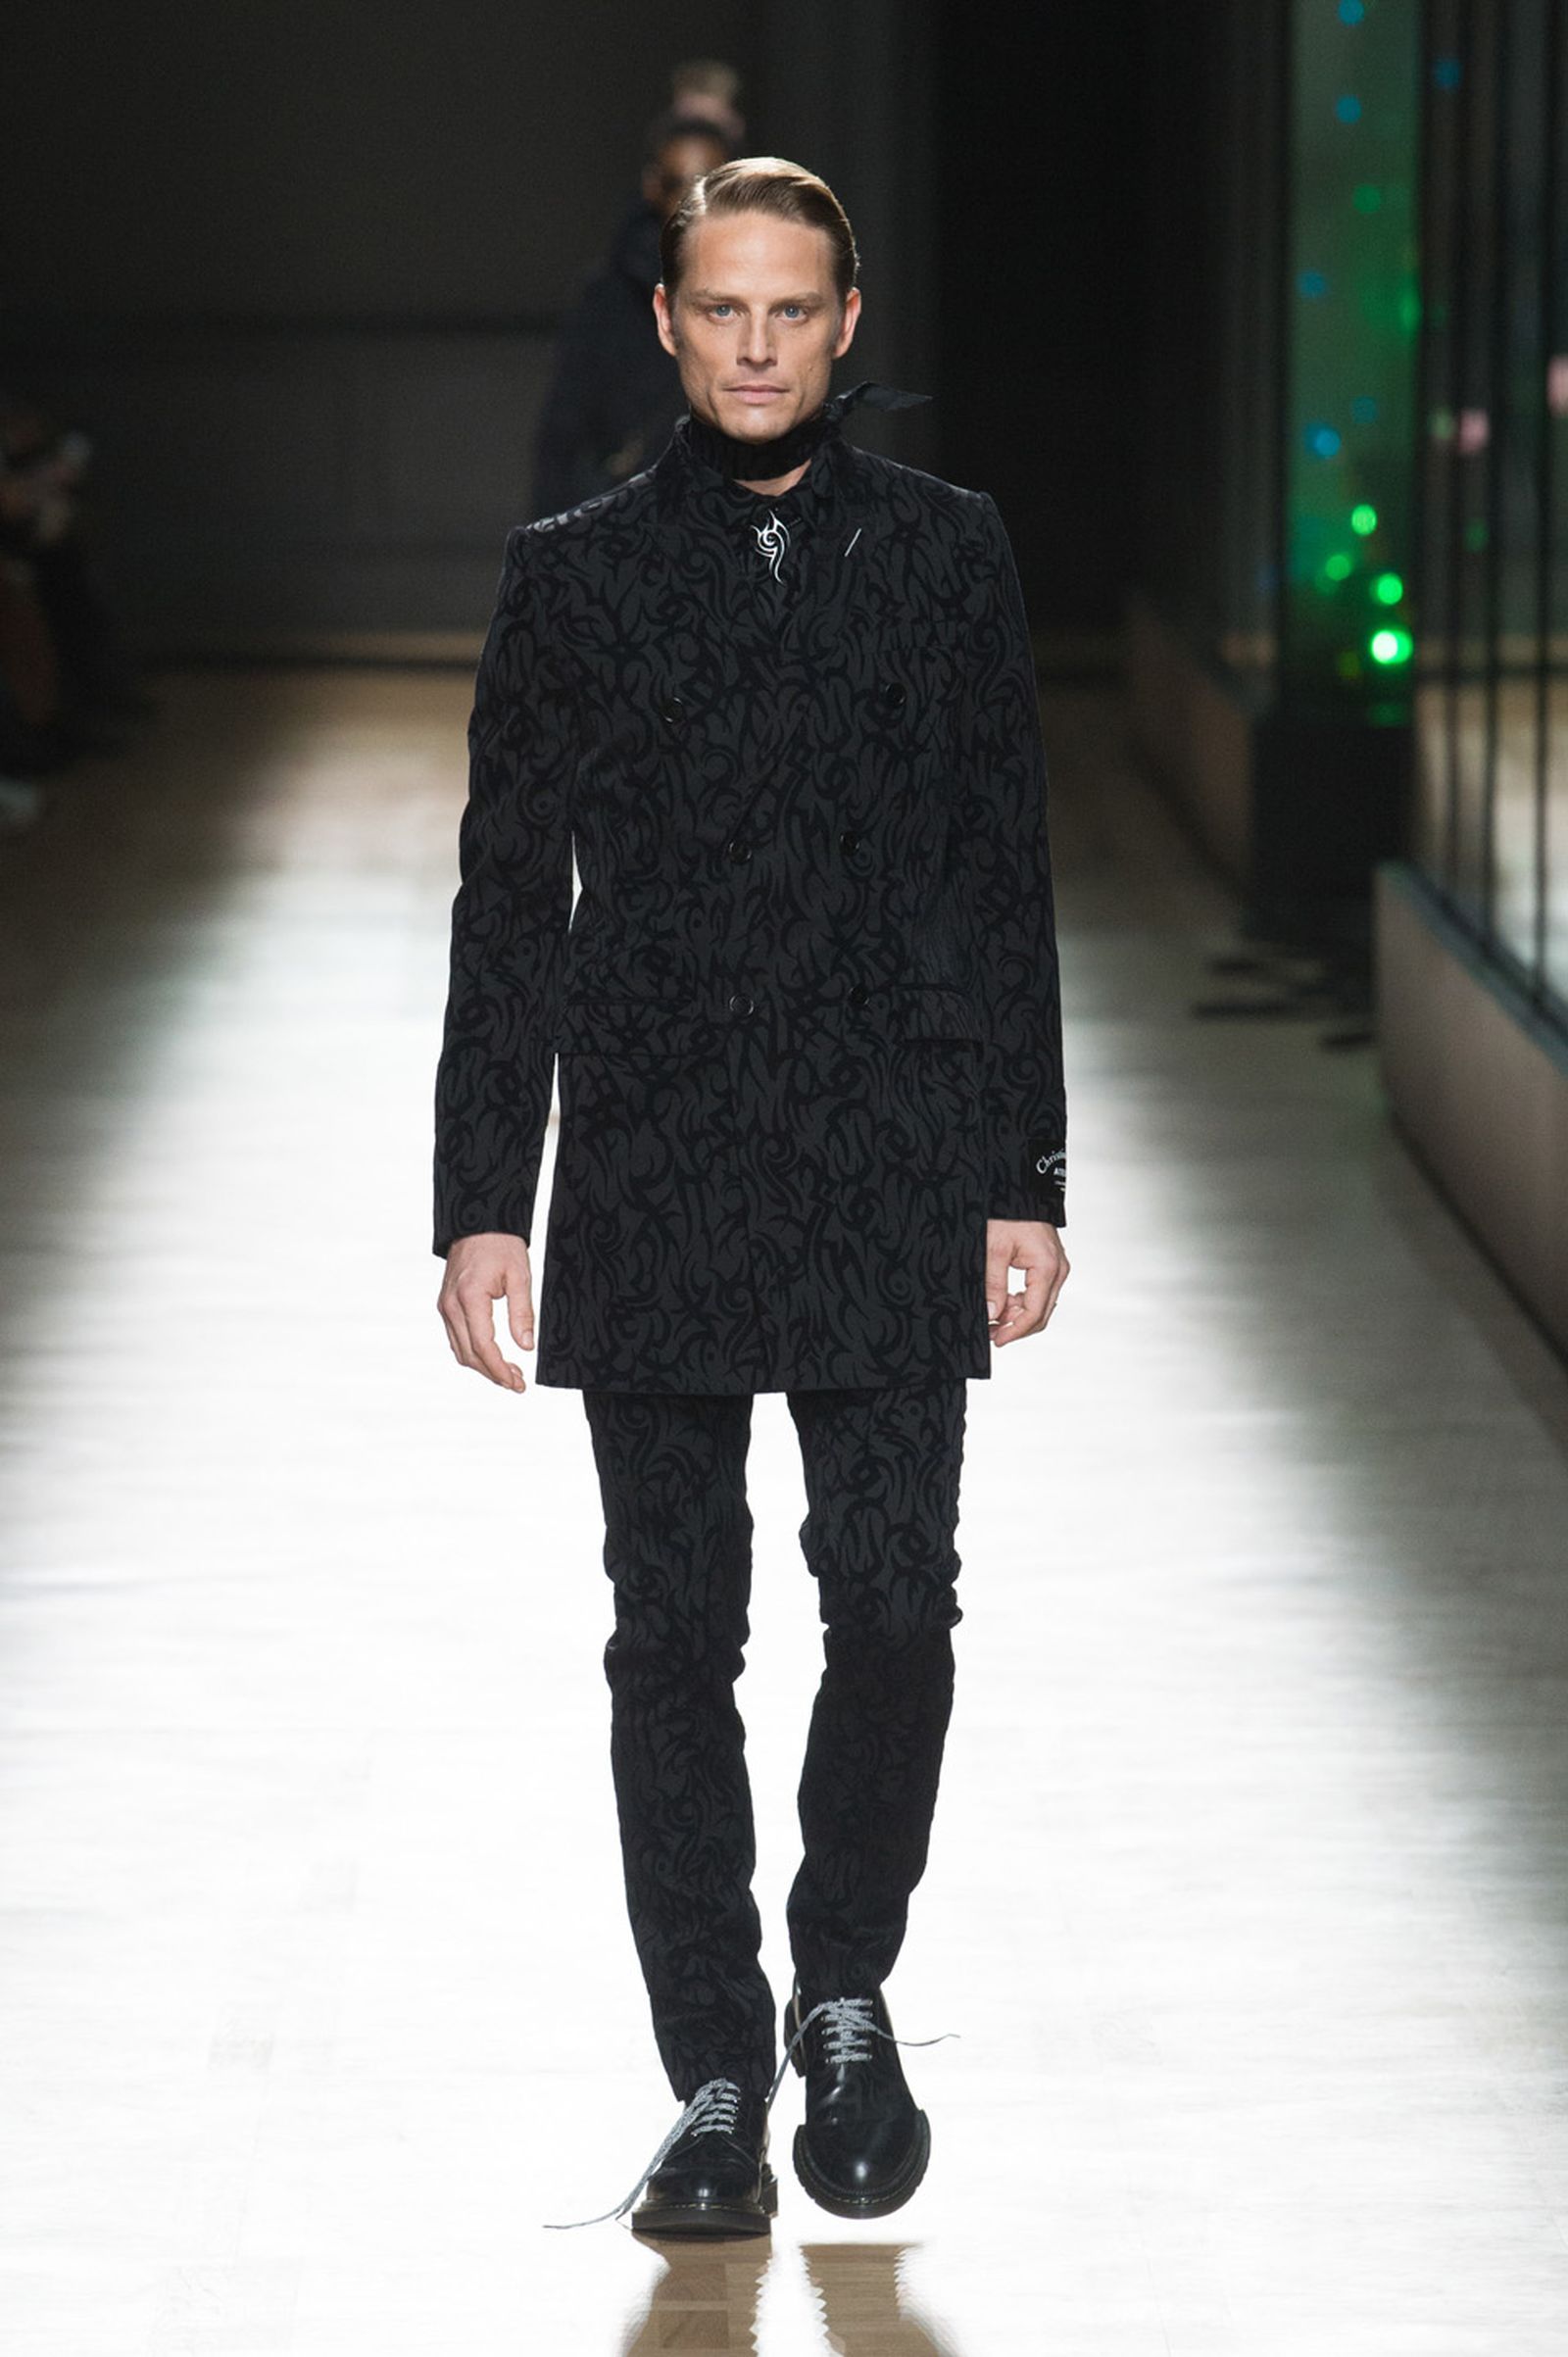 DIOR HOMME WINTER 18 19 BY PATRICE STABLE look43 Fall/WInter 2018 runway